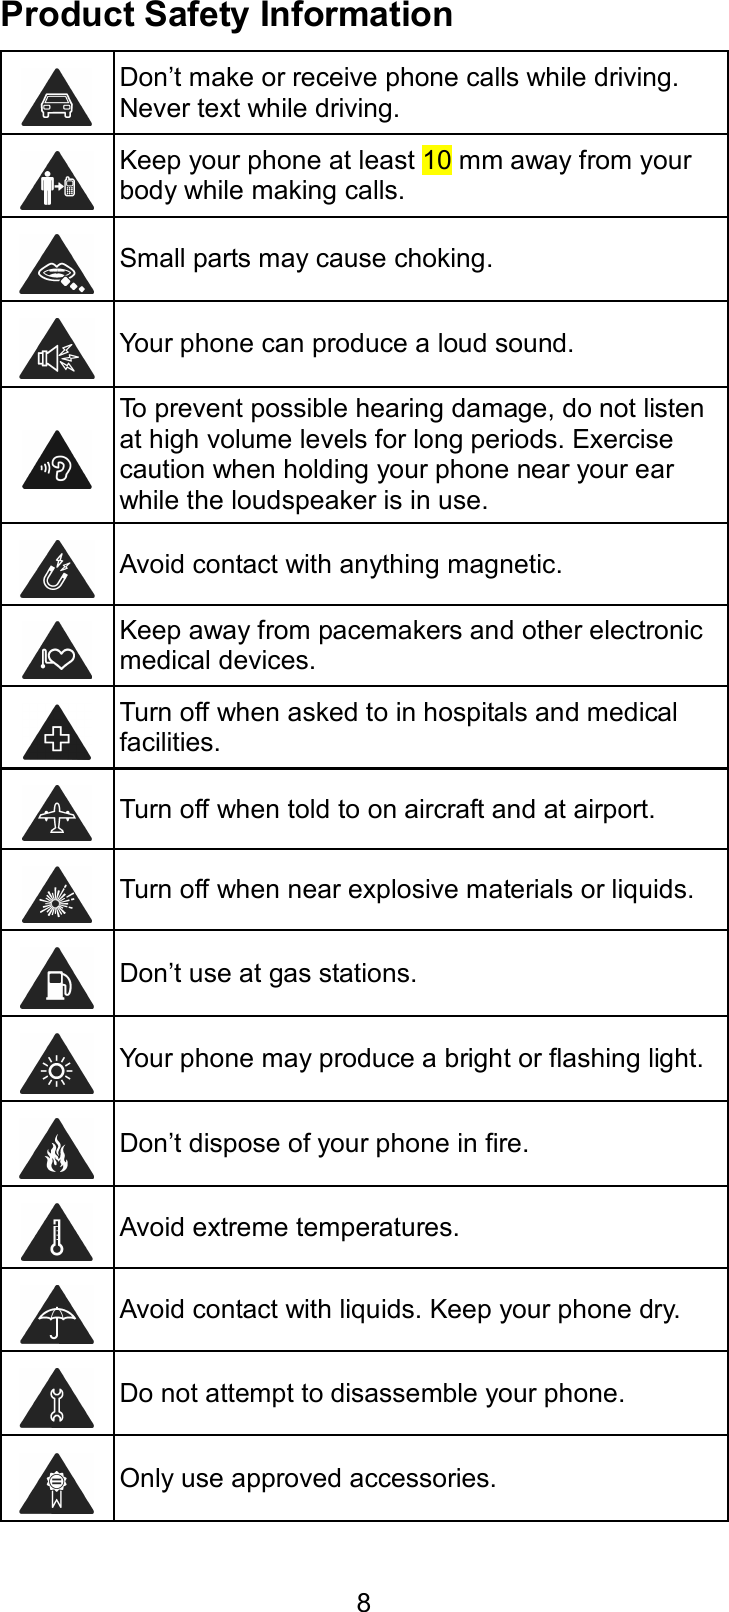  8 Product Safety Information  Don’t make or receive phone calls while driving. Never text while driving.  Keep your phone at least 10 mm away from your body while making calls.  Small parts may cause choking.  Your phone can produce a loud sound.  To prevent possible hearing damage, do not listen at high volume levels for long periods. Exercise caution when holding your phone near your ear while the loudspeaker is in use.  Avoid contact with anything magnetic.  Keep away from pacemakers and other electronic medical devices.  Turn off when asked to in hospitals and medical facilities.  Turn off when told to on aircraft and at airport.  Turn off when near explosive materials or liquids.  Don’t use at gas stations.  Your phone may produce a bright or flashing light.  Don’t dispose of your phone in fire.  Avoid extreme temperatures.  Avoid contact with liquids. Keep your phone dry.  Do not attempt to disassemble your phone.  Only use approved accessories. 